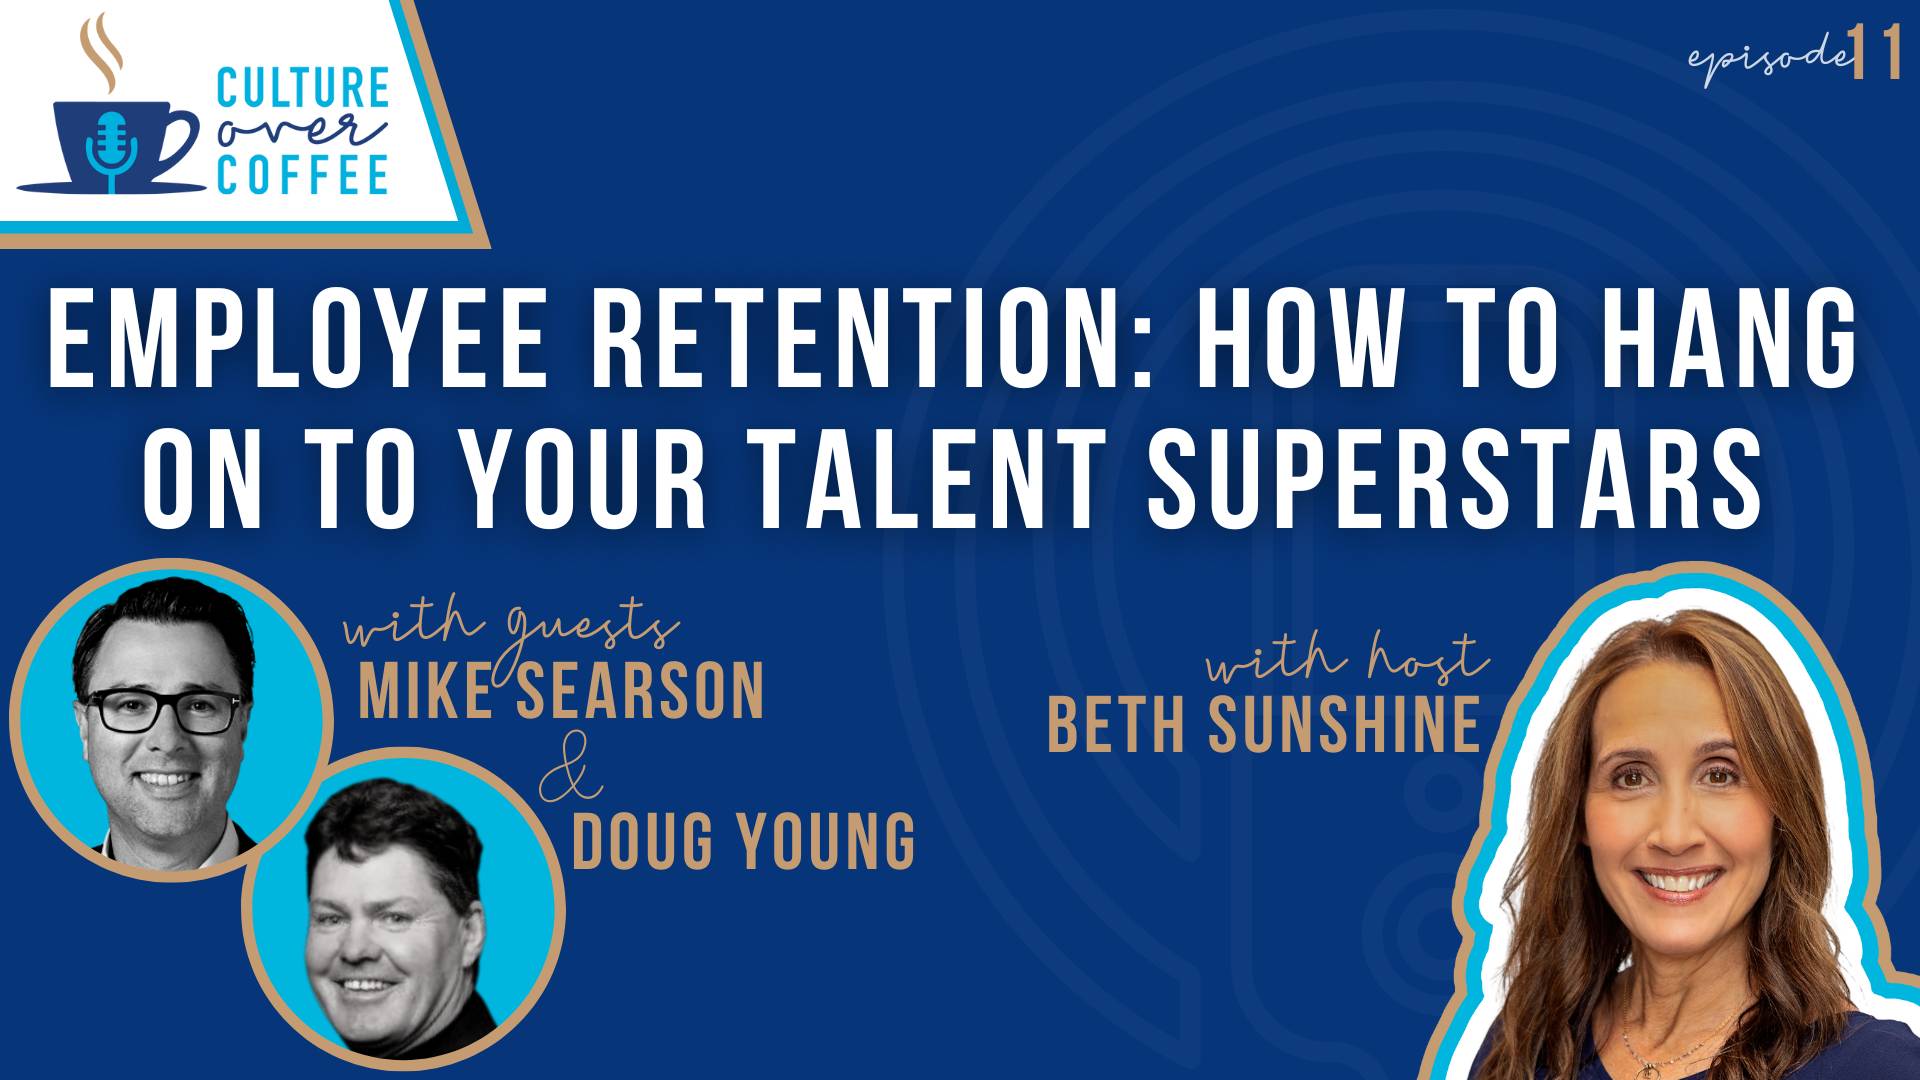 Culture Over Coffee | Employee Retention: How to Hang Onto Your Superstars with Mike Searson and Doug Young 